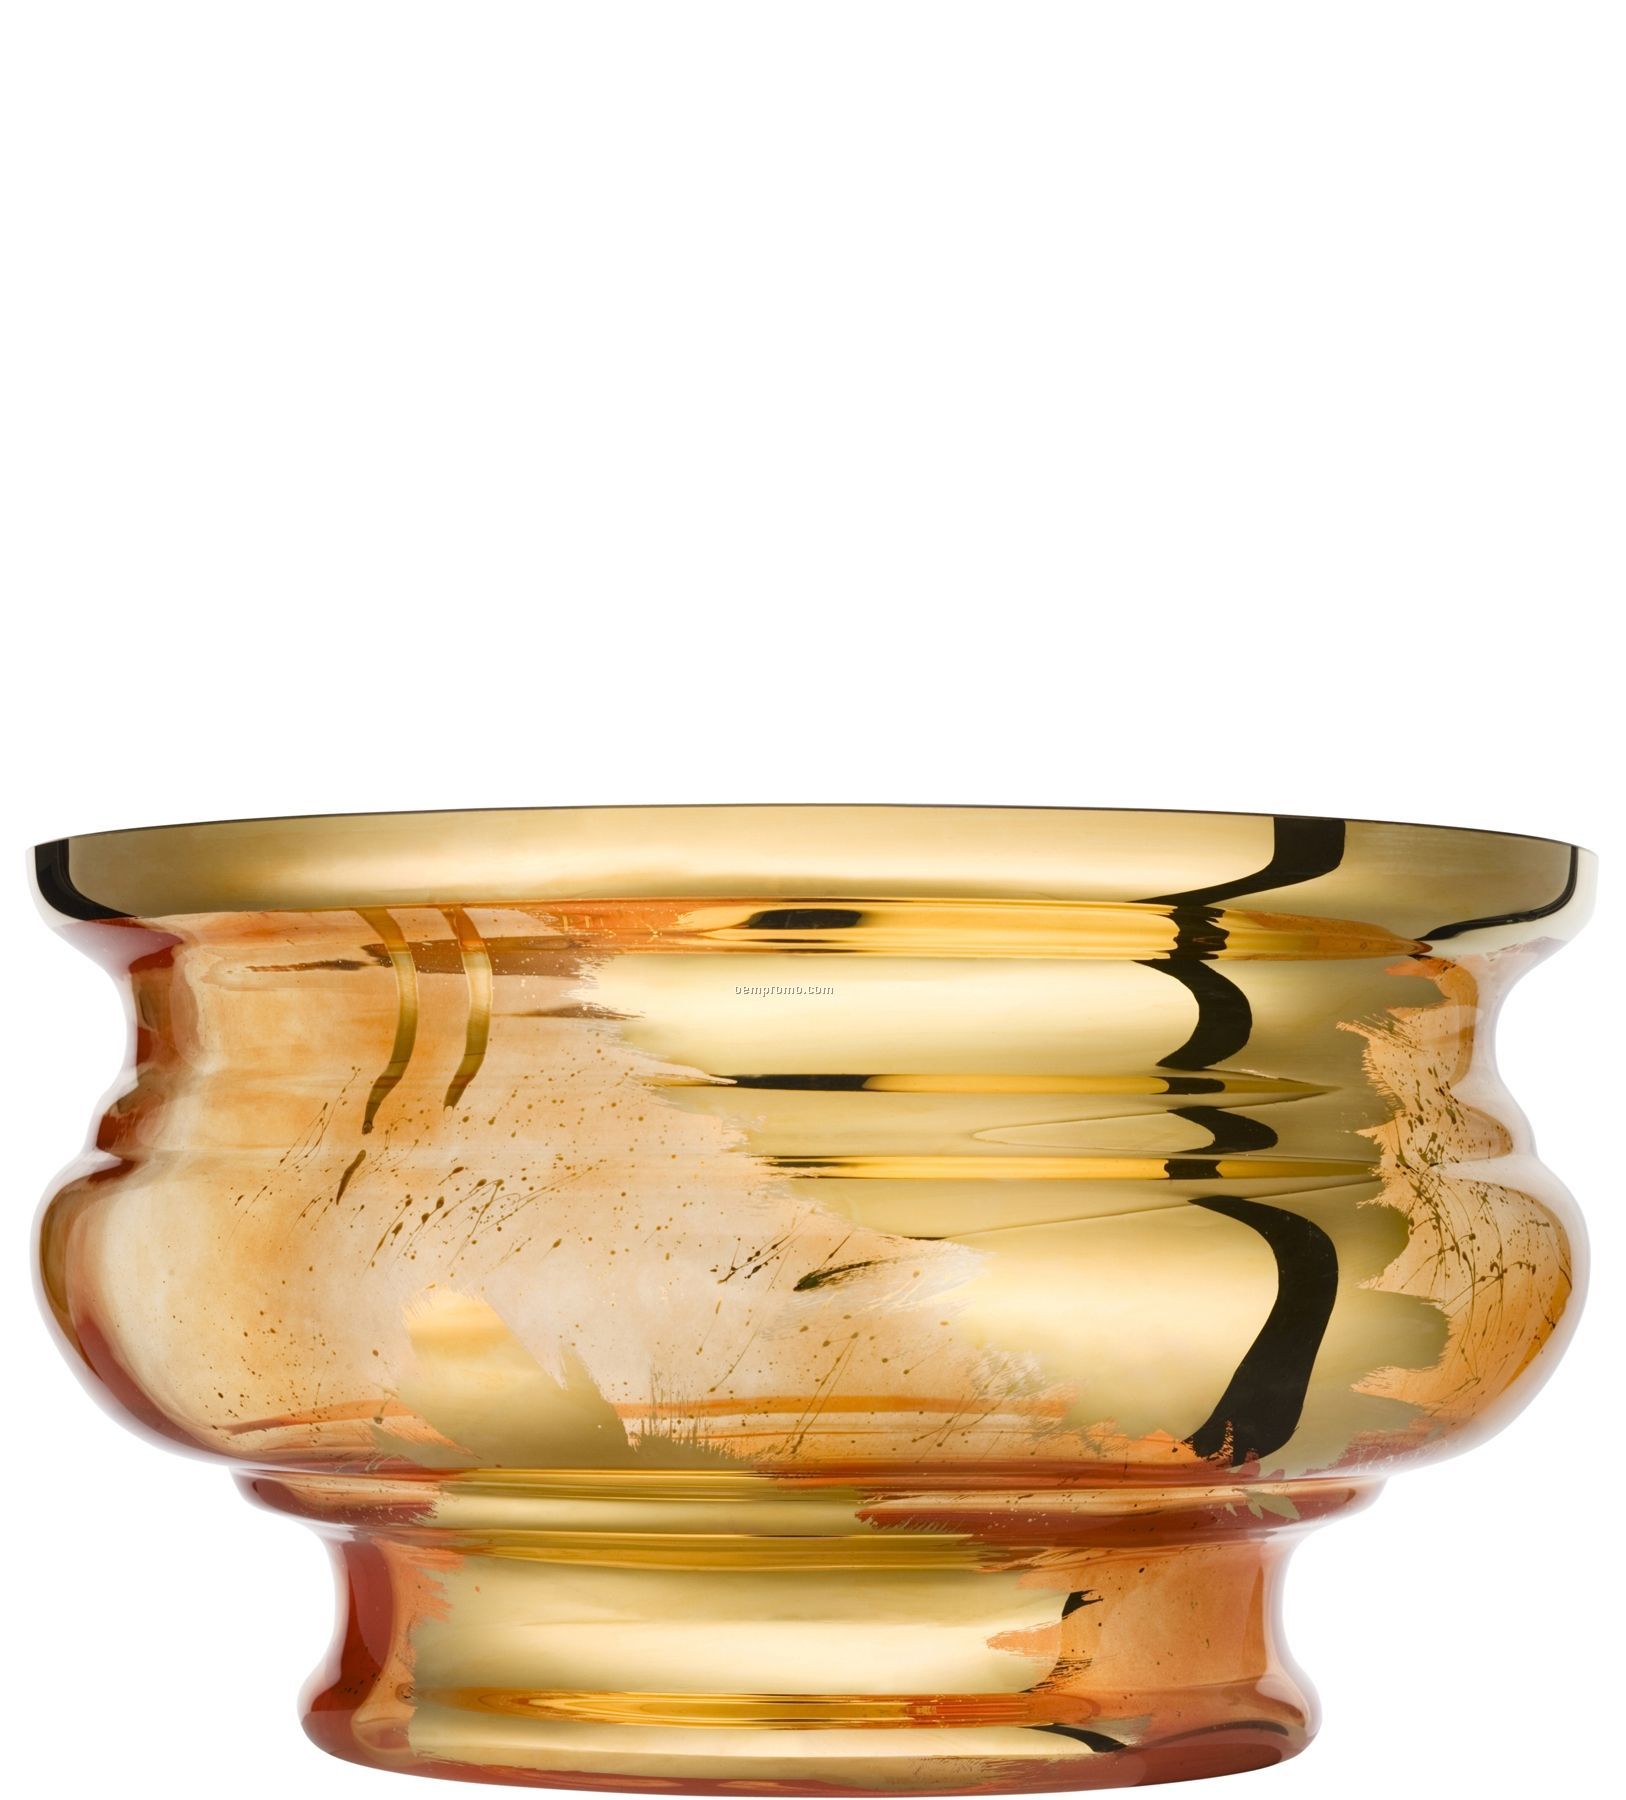  - Jackie-Hand-Painted-Glass-Bowl-By-Asa-Jungnelius--Orange-_10141846